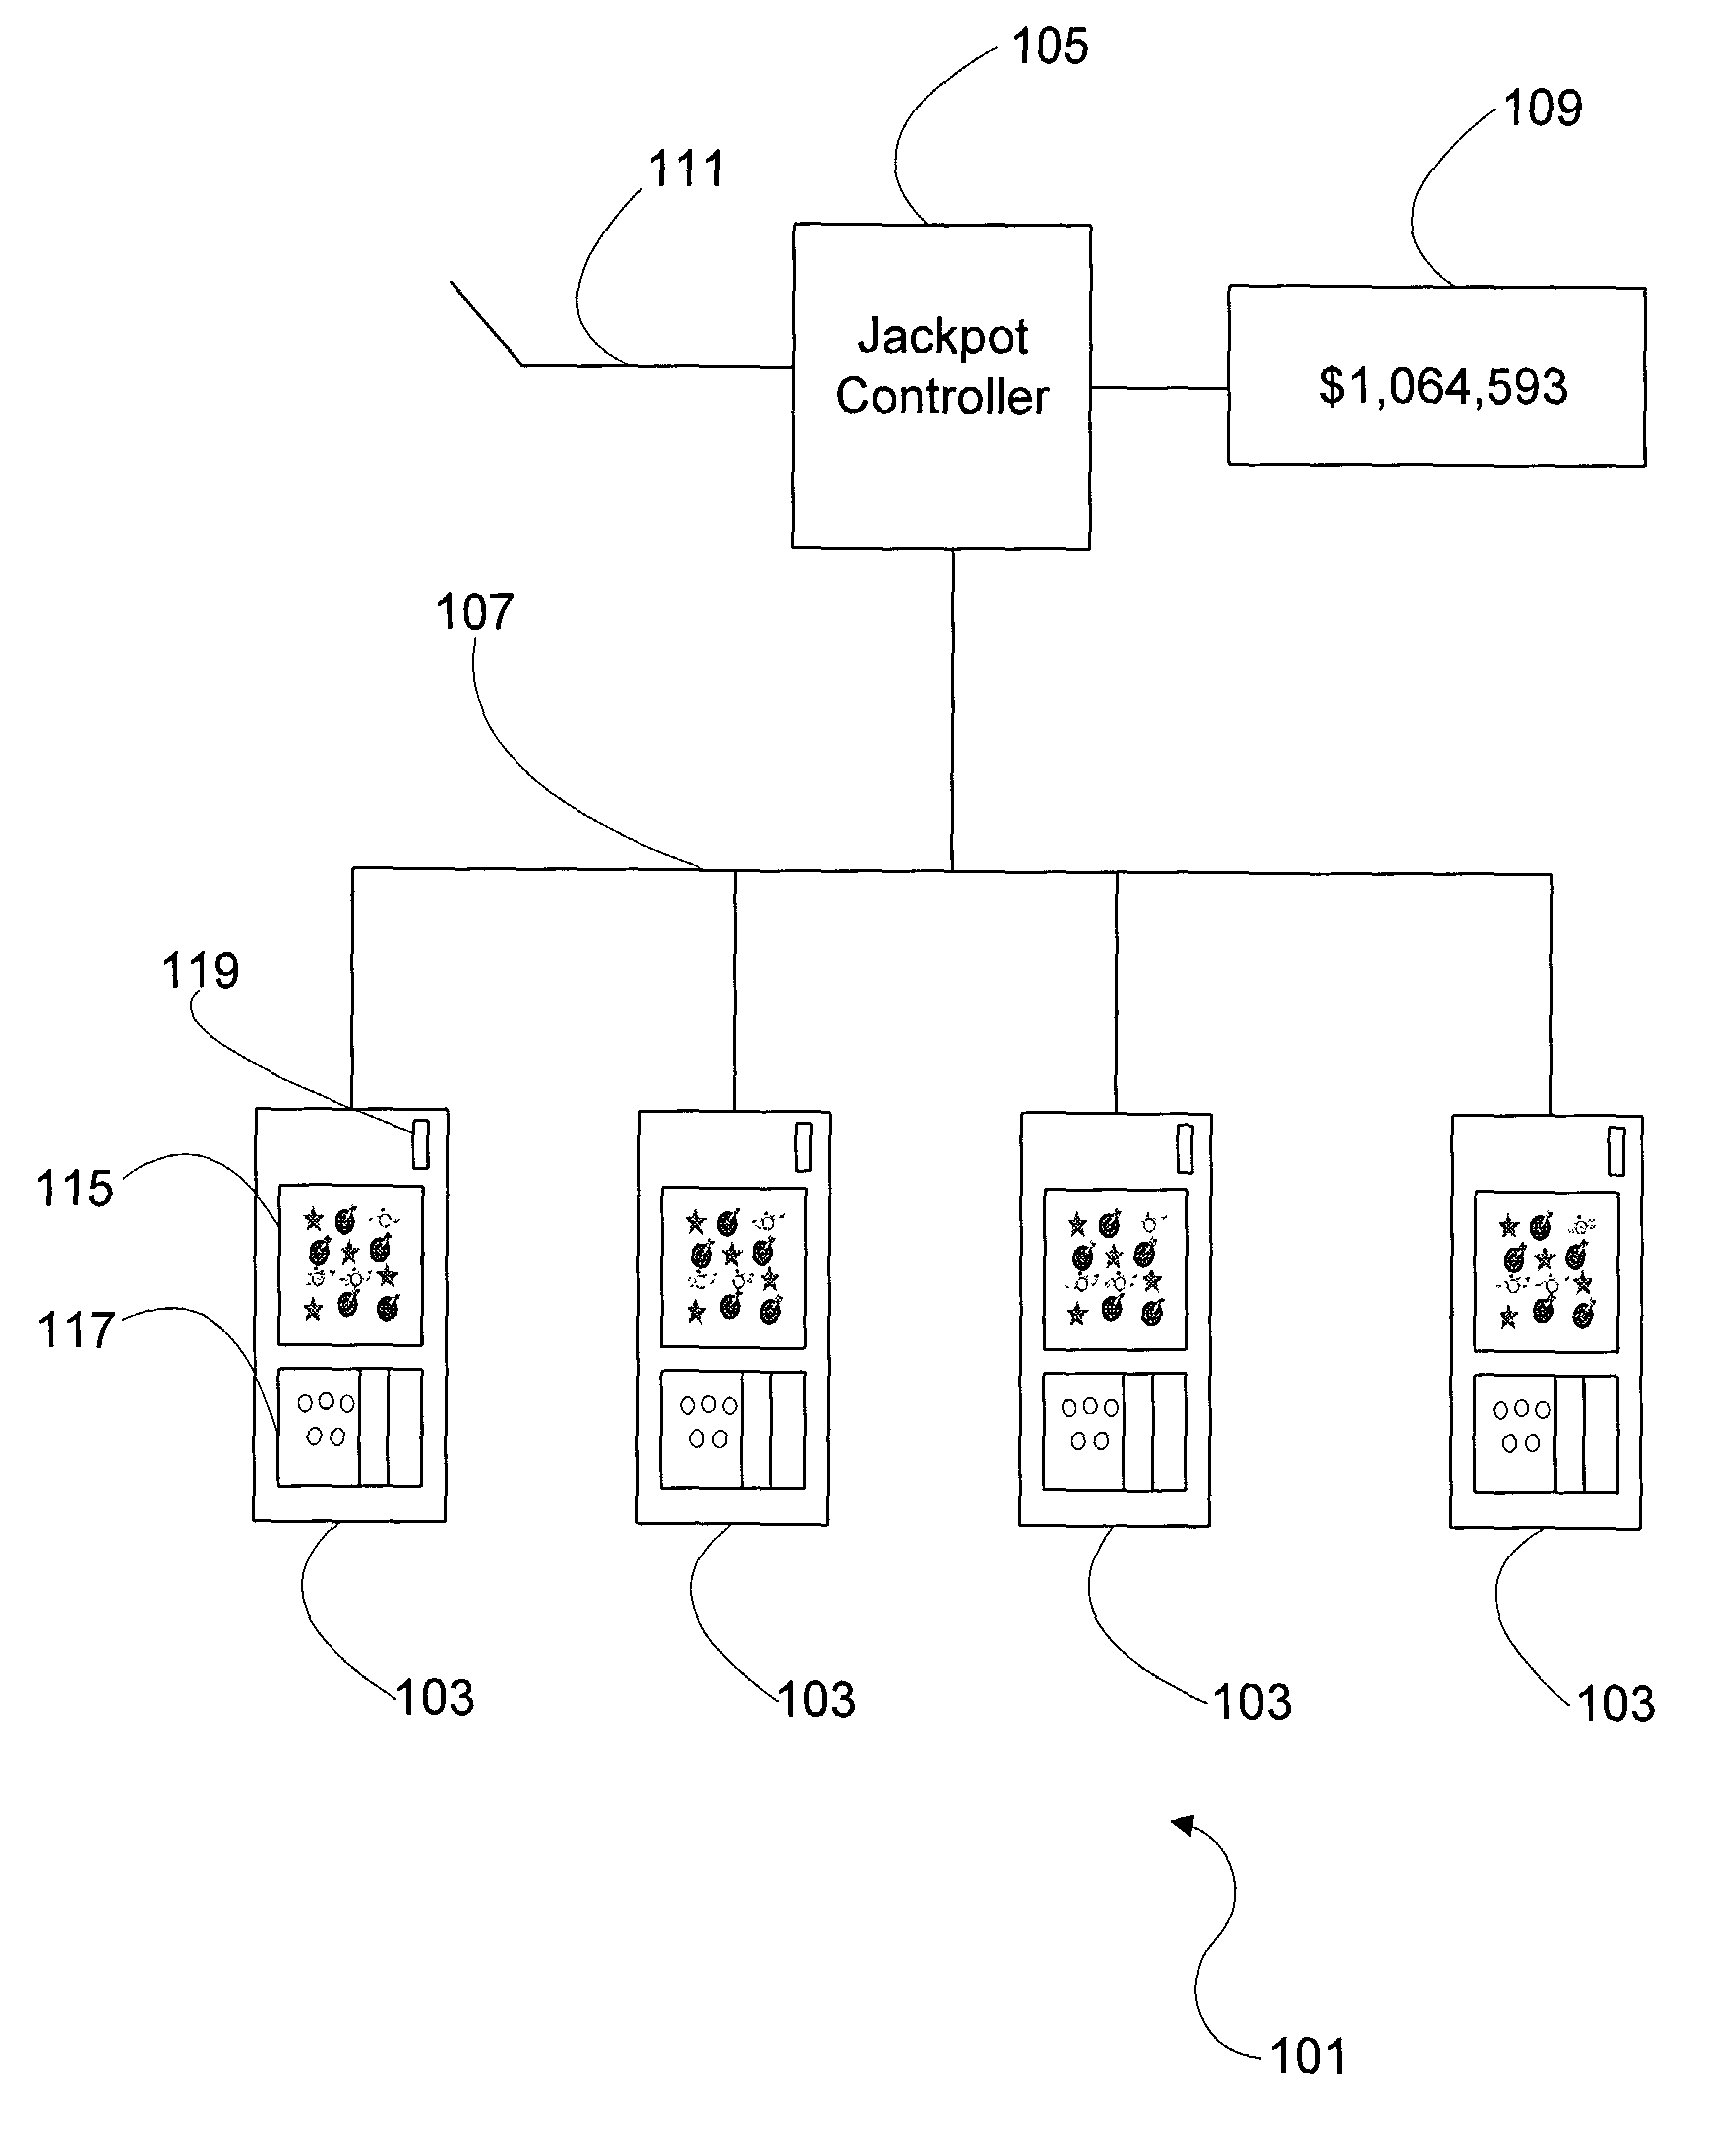 Method of apparatus for allocating a player's contribution in a gaming apparatus between a plurality of games